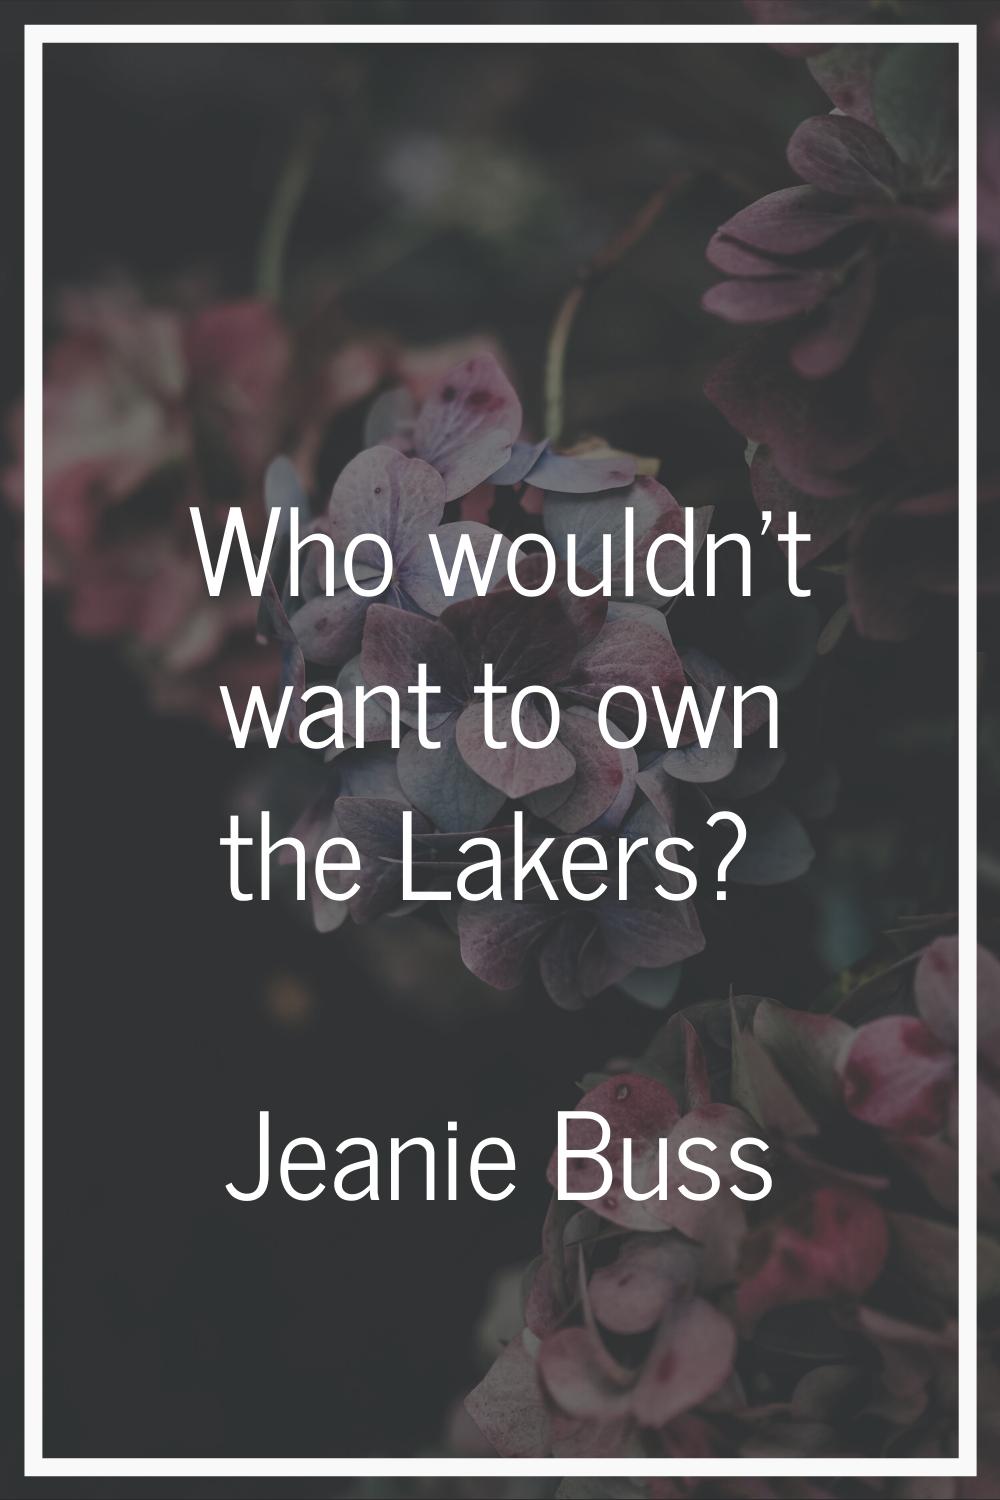 Who wouldn't want to own the Lakers?